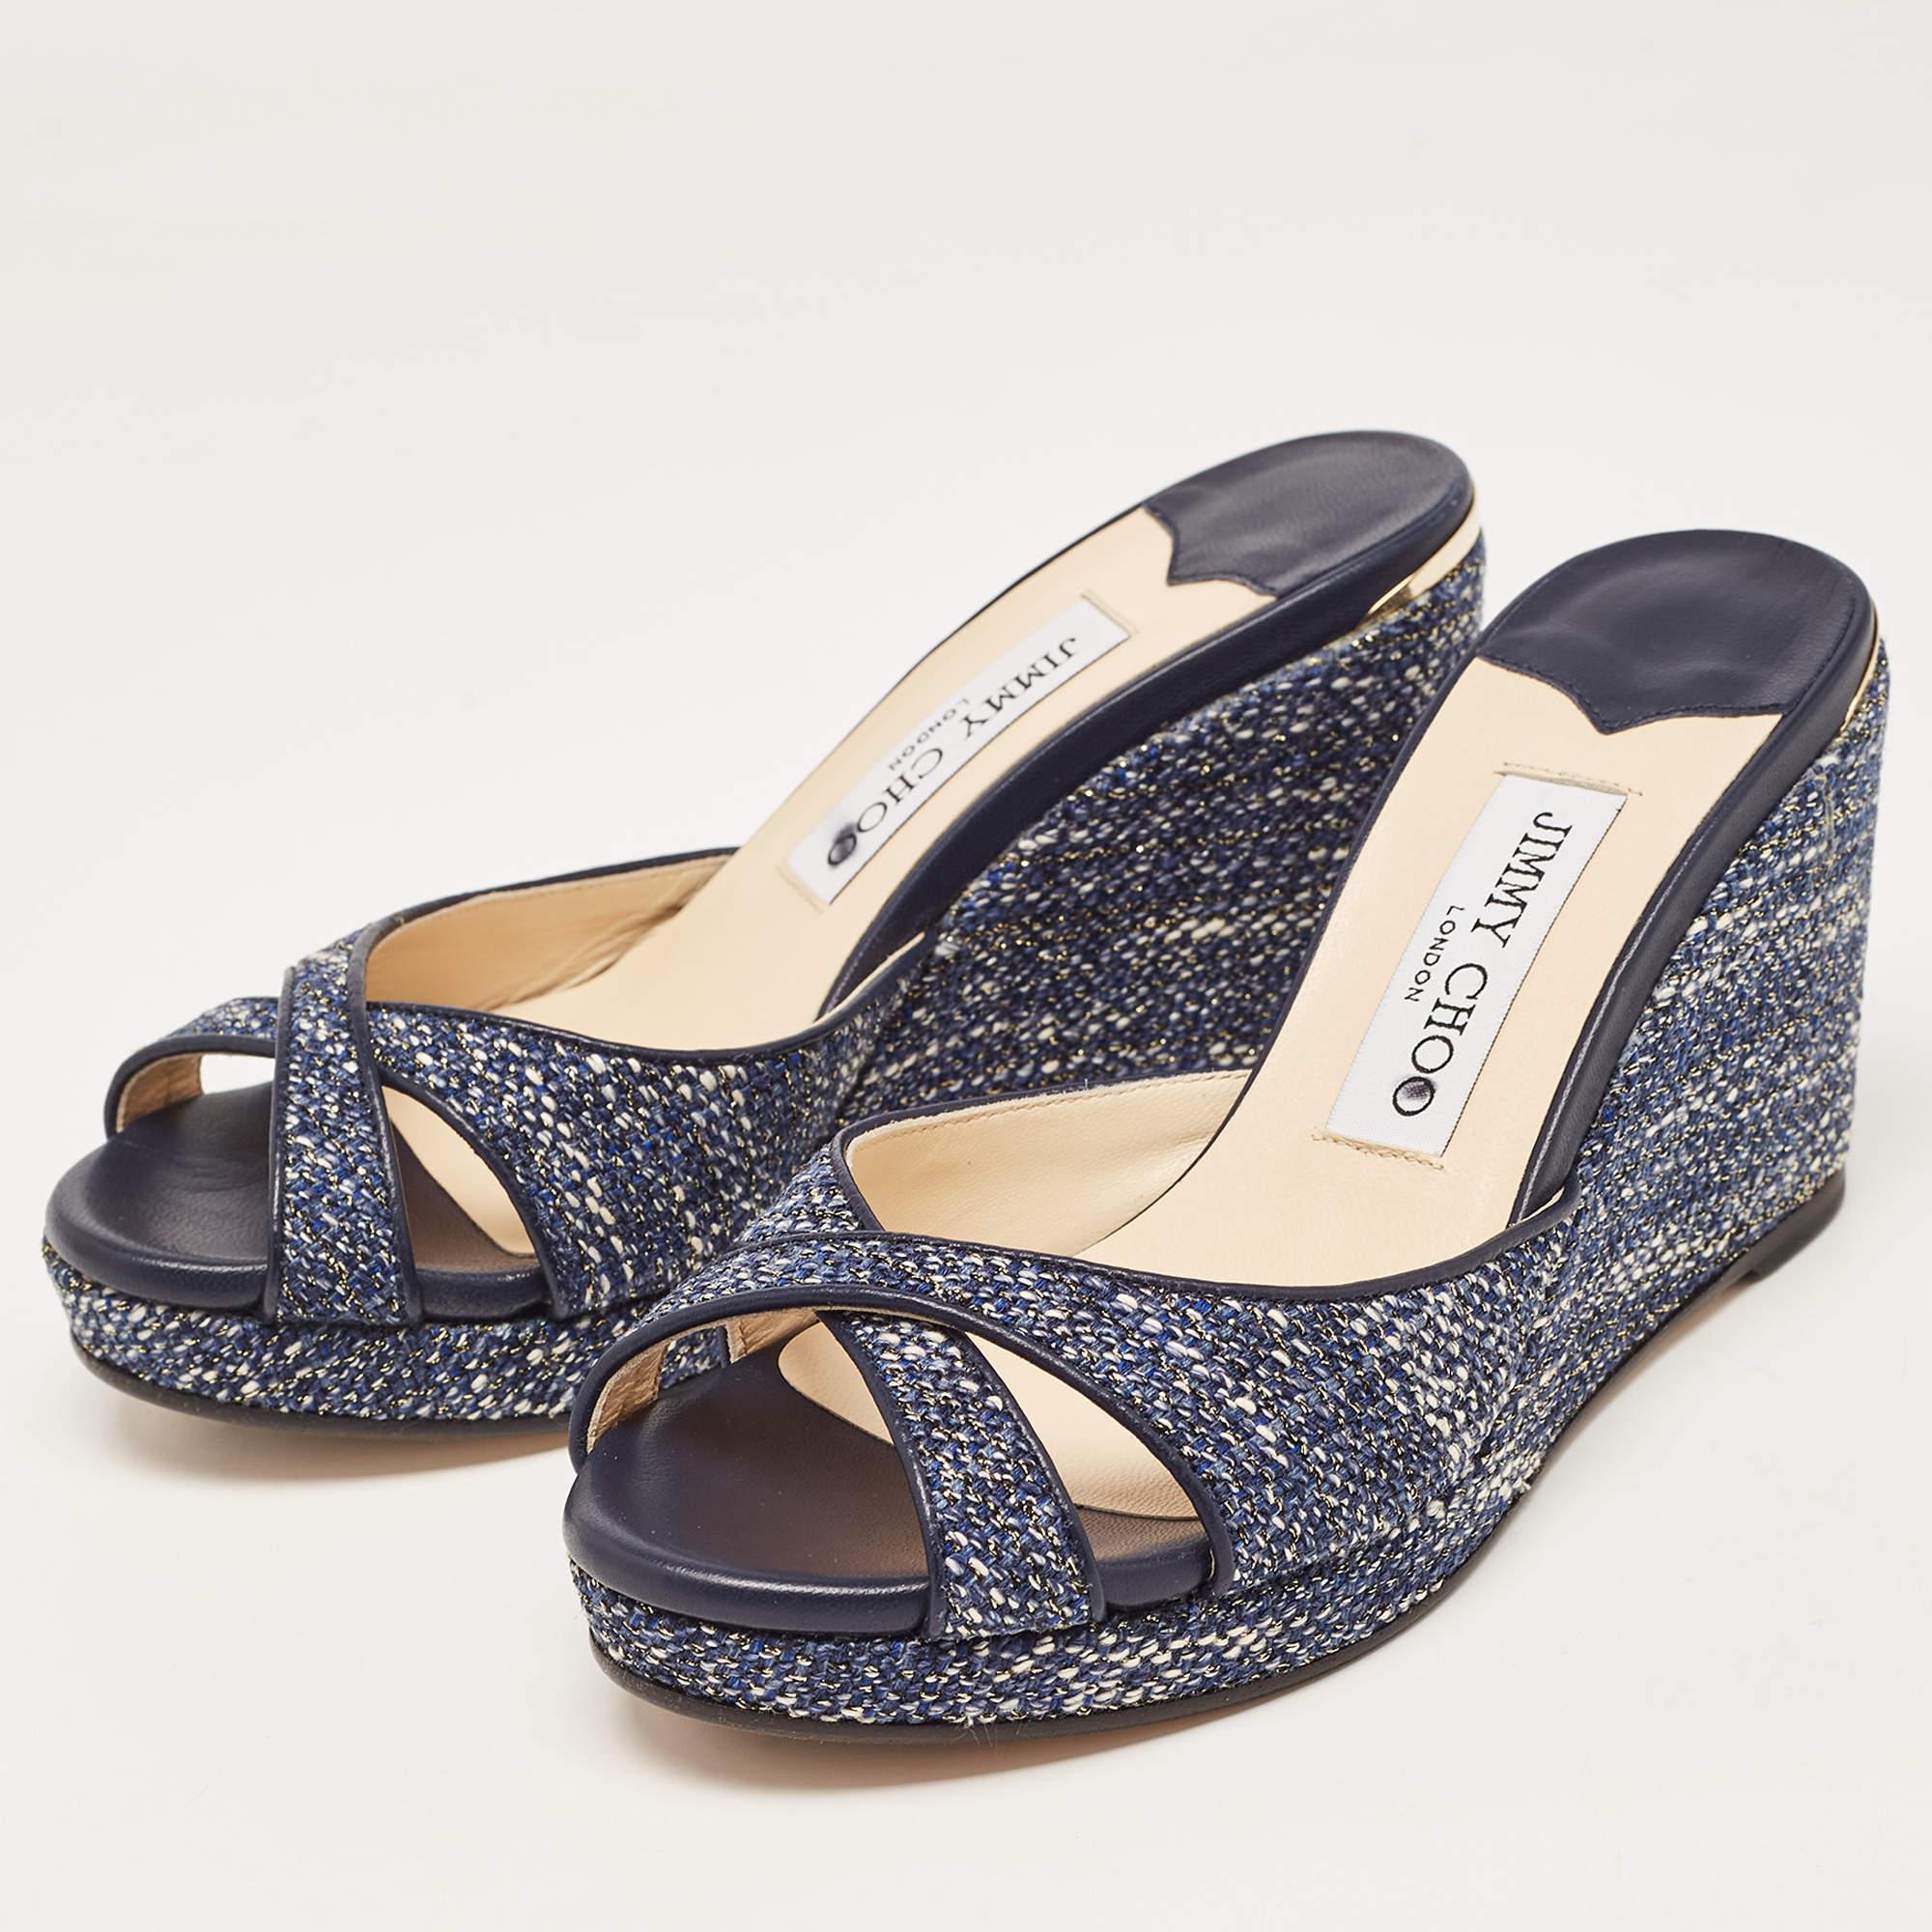 The Jimmy Choo sandals feature a sophisticated blend of navy blue tweed and leather. With a stylish wedge heel, they offer both elegance and comfort for any occasion.

Includes: Original Dustbag, Original Box